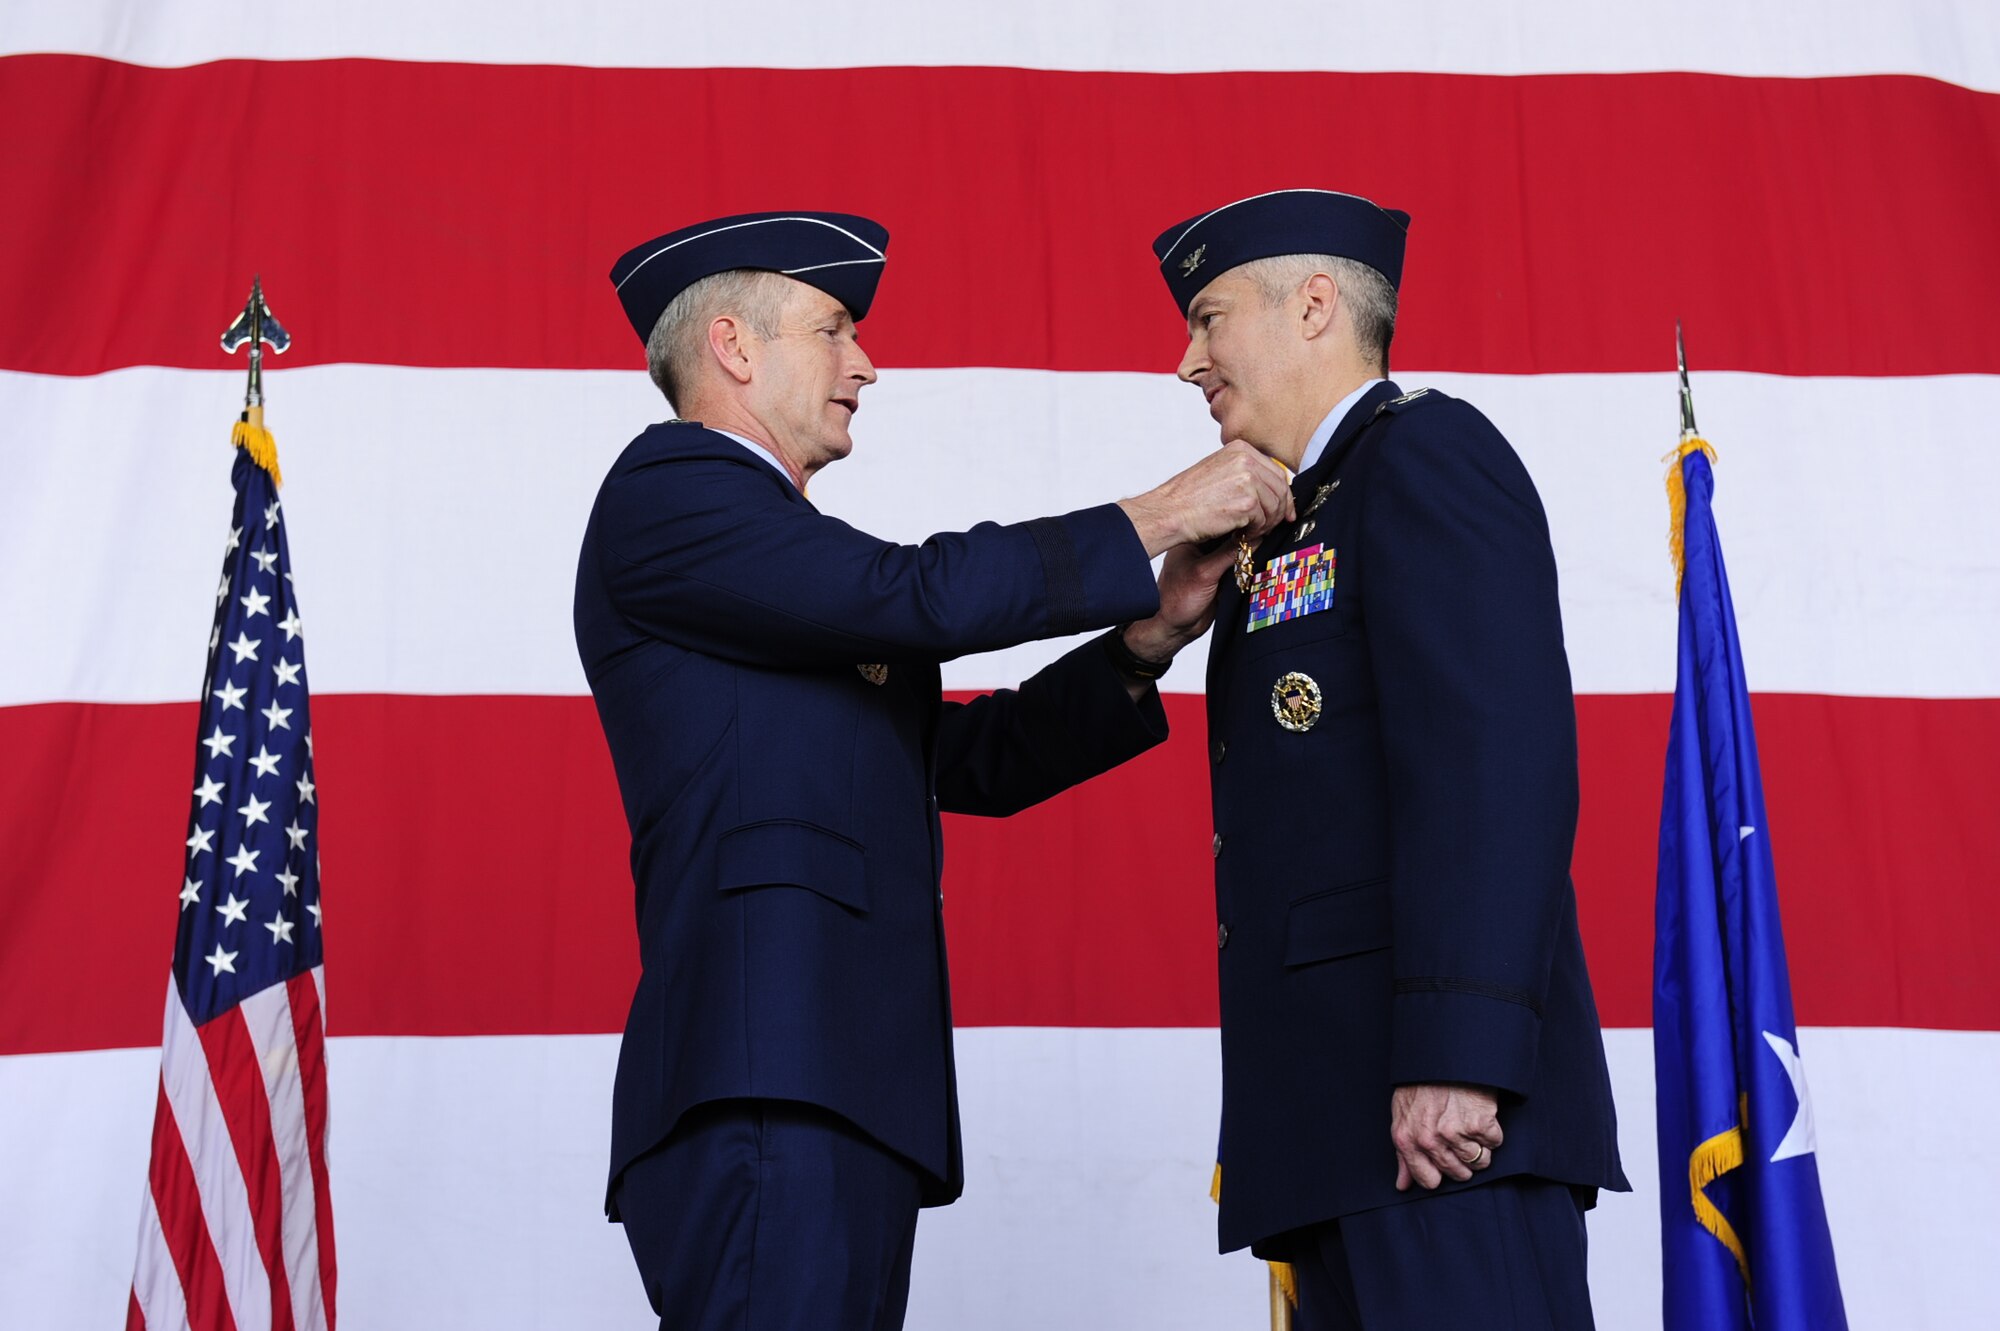 Lt. Gen. Terrence O’Shaughnessy, 7th Air Force commander, awards a Legion of Merit medal to Col. Jeremy Sloane, outgoing 8th Fighter Wing commander on Kunsan Air Base, Republic of Korea, May 20, 2016. (U.S. Air Force photo by Staff Sgt. Chelsea Browning/Released)